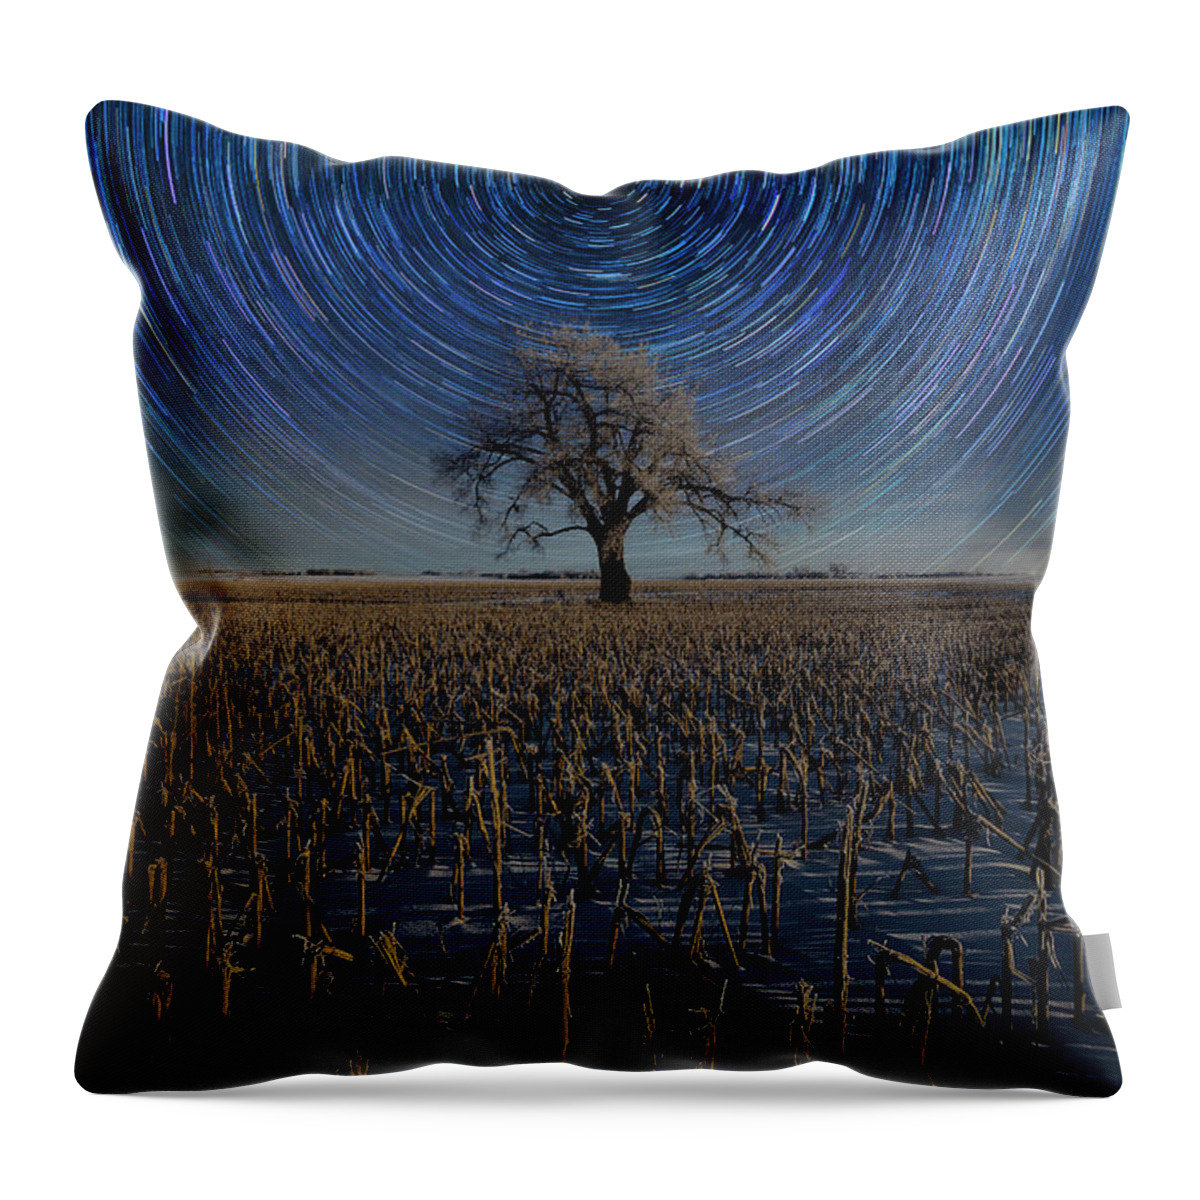 Star Trails Throw Pillow featuring the photograph Use of Time by Aaron J Groen